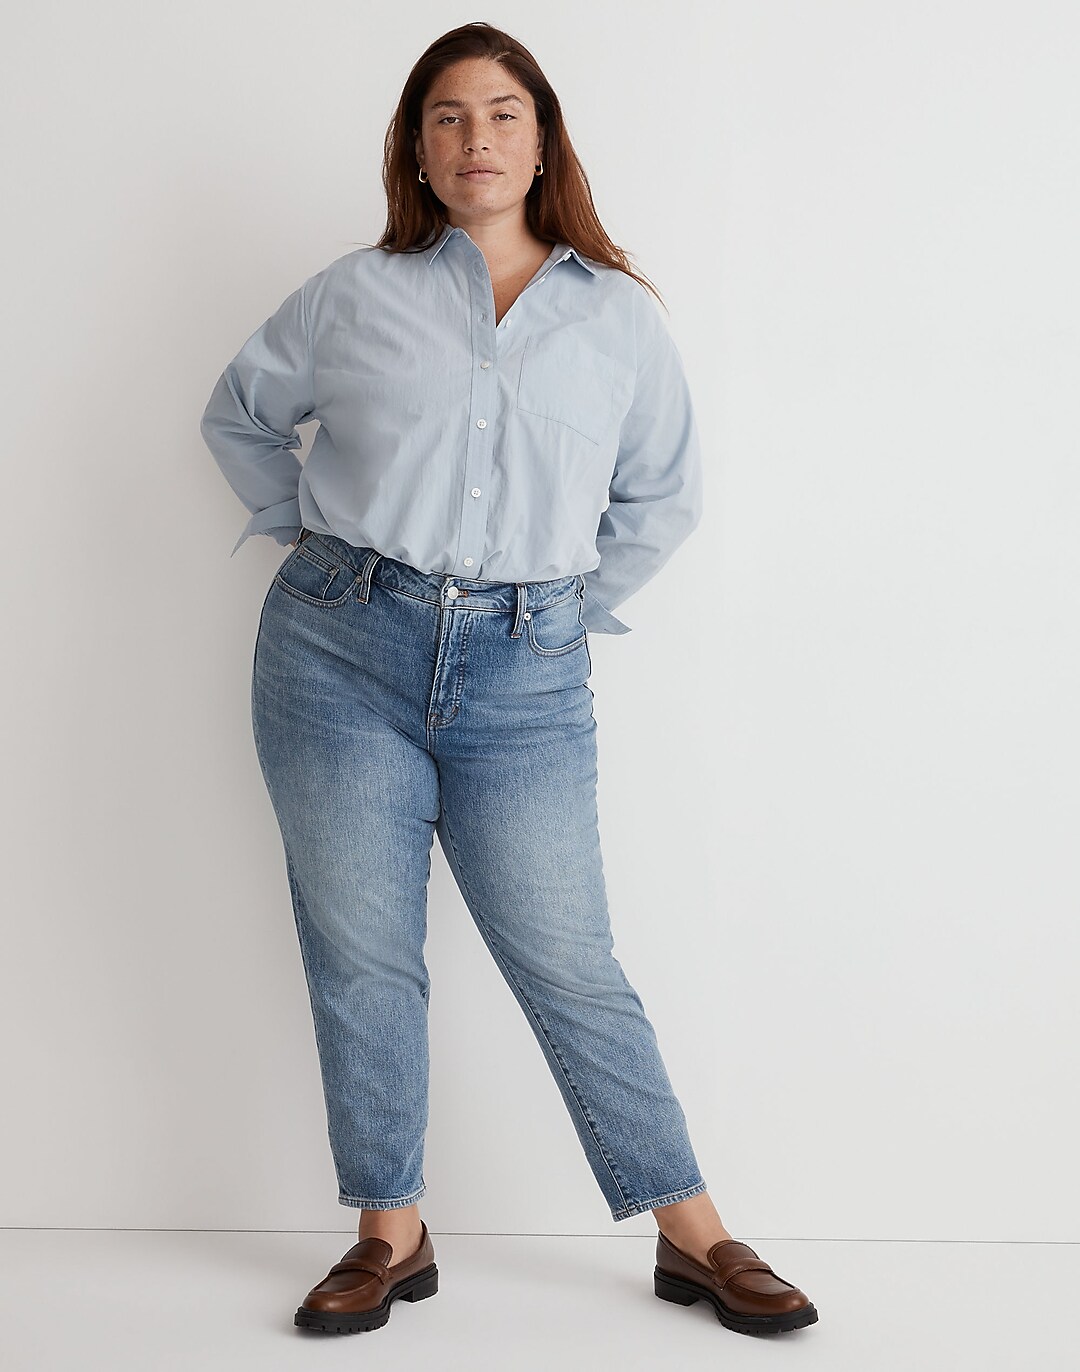 The Plus Perfect Vintage Jean in Heathcote Wash